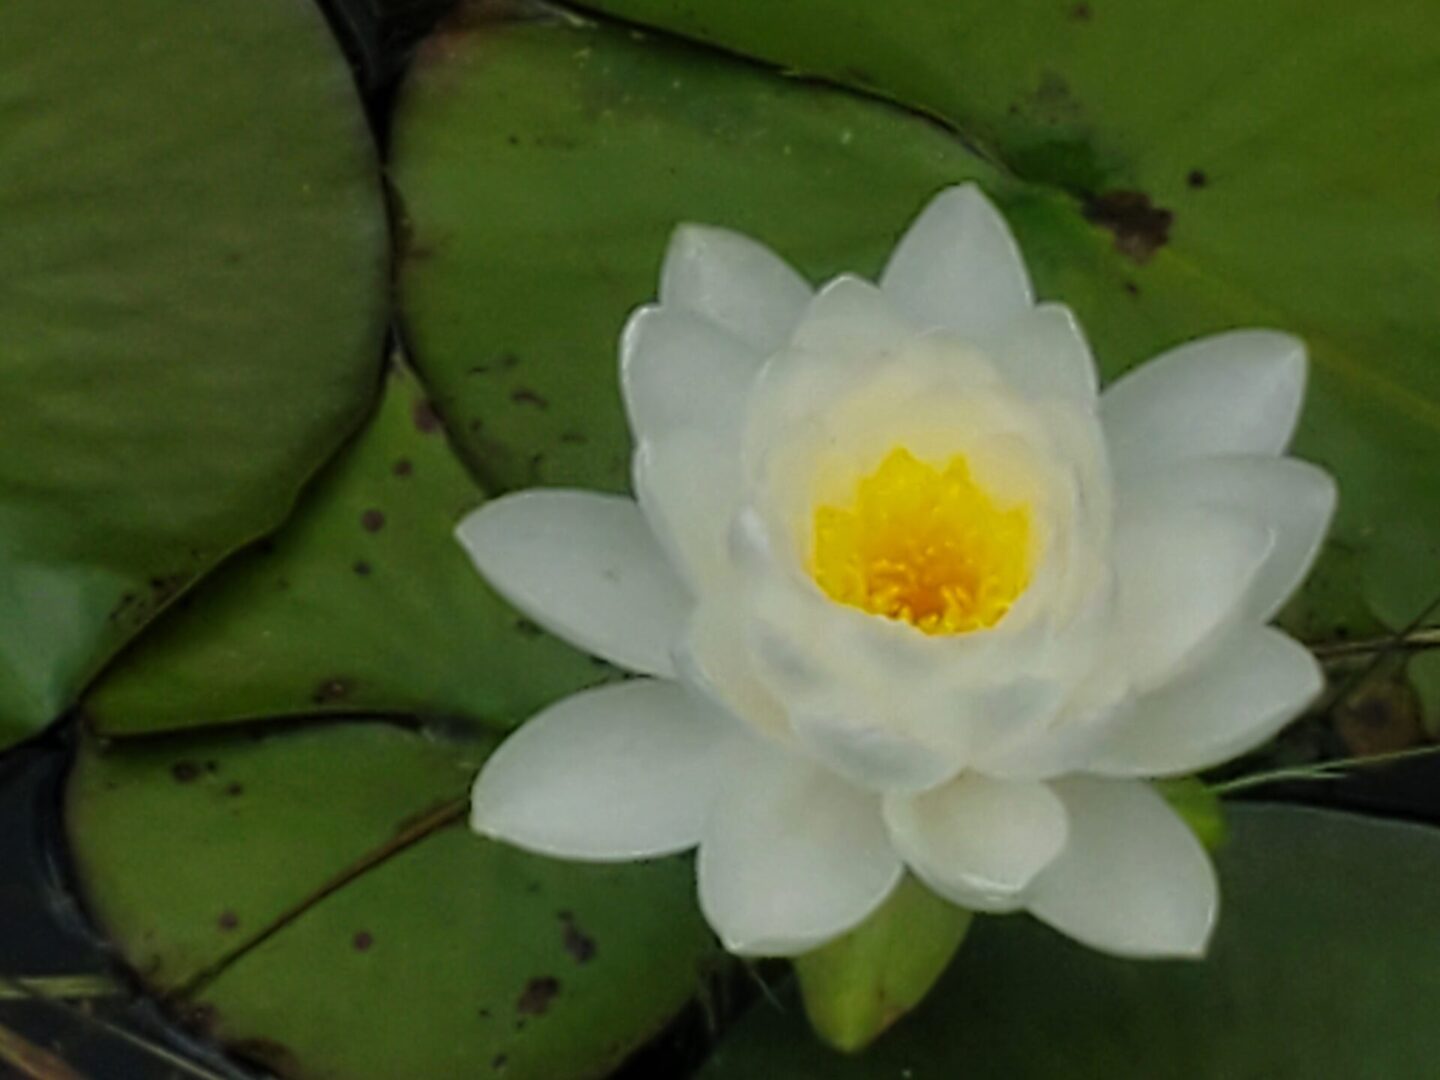 A white flower with yellow center in the middle of it.